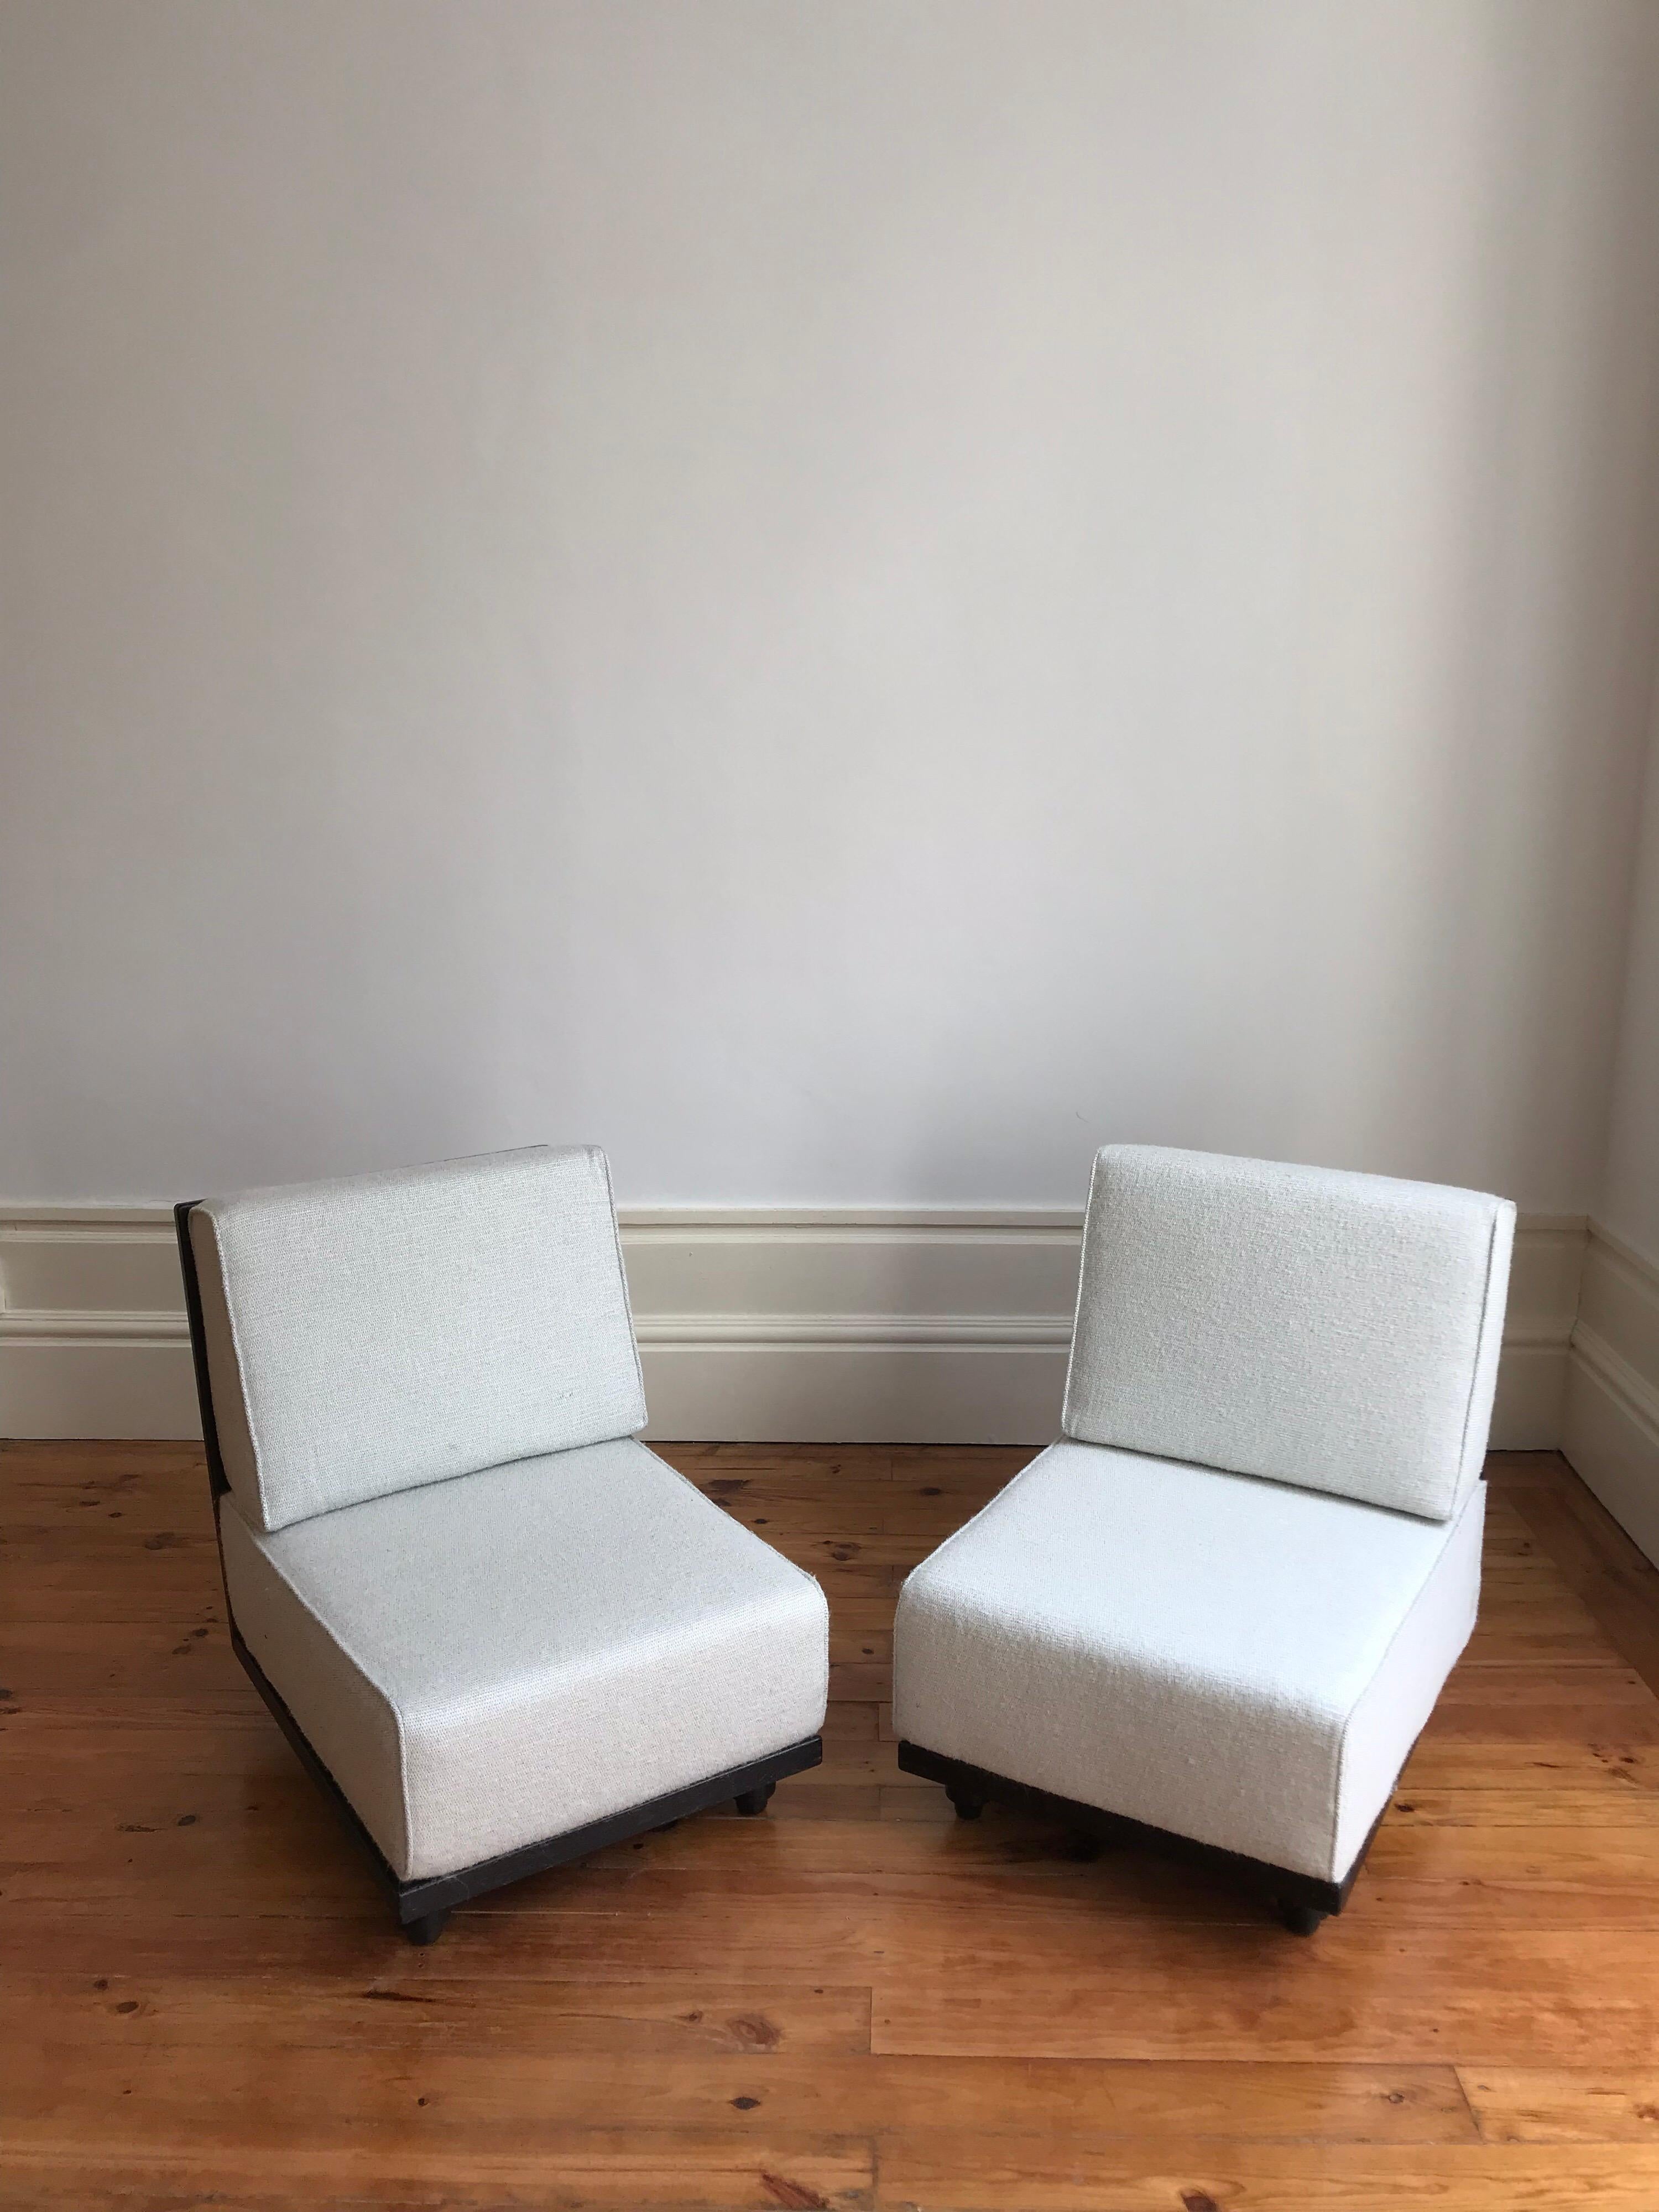 Pair of lounge chairs ''Elmyre'' by Guillerme Chambron reupholstered entirely with a Pierre Frey fabric Plumette. 

Robert Guillerme (1913 - 1990) and Jacques Chambron (1914 - 2001).
Their company, Votre Maison, has marked the history of French